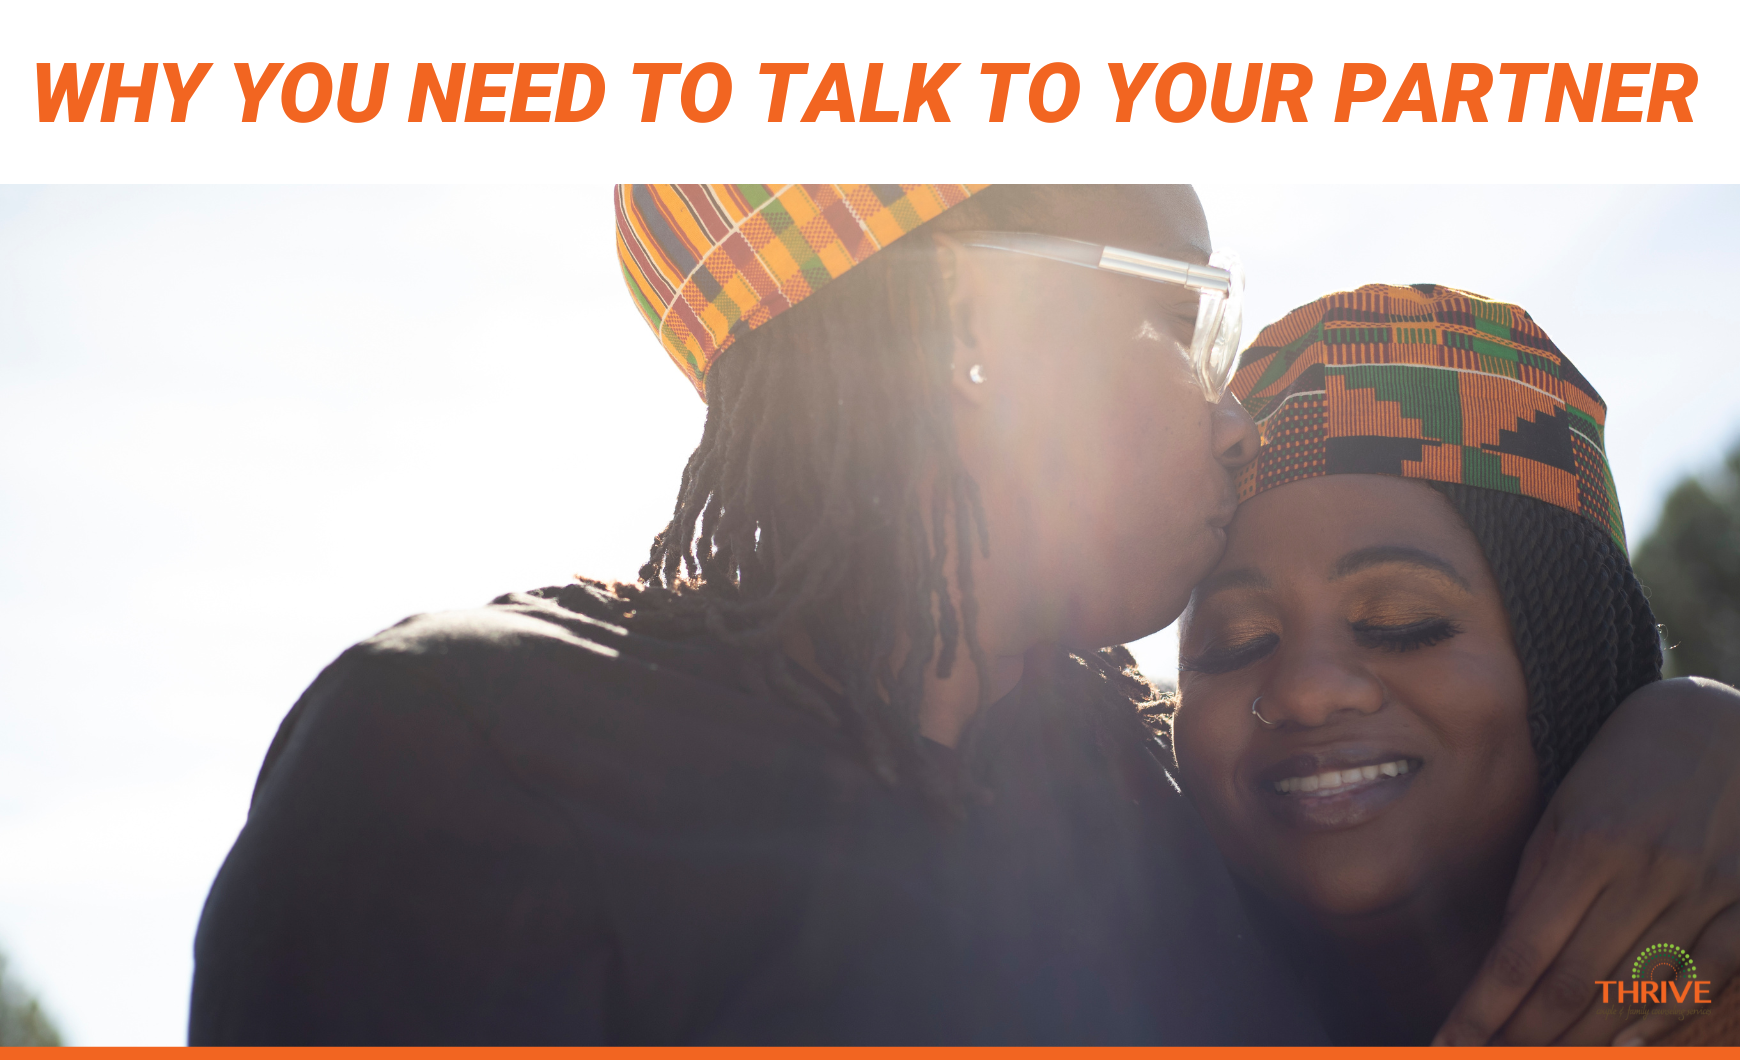 Orange text that reads "Why You Need to Talk to Your Partner" above a photo of a couple. We can see their faces and shoulders. They are both Black women, and the one on the left is kissing the one on the right on the forehead.